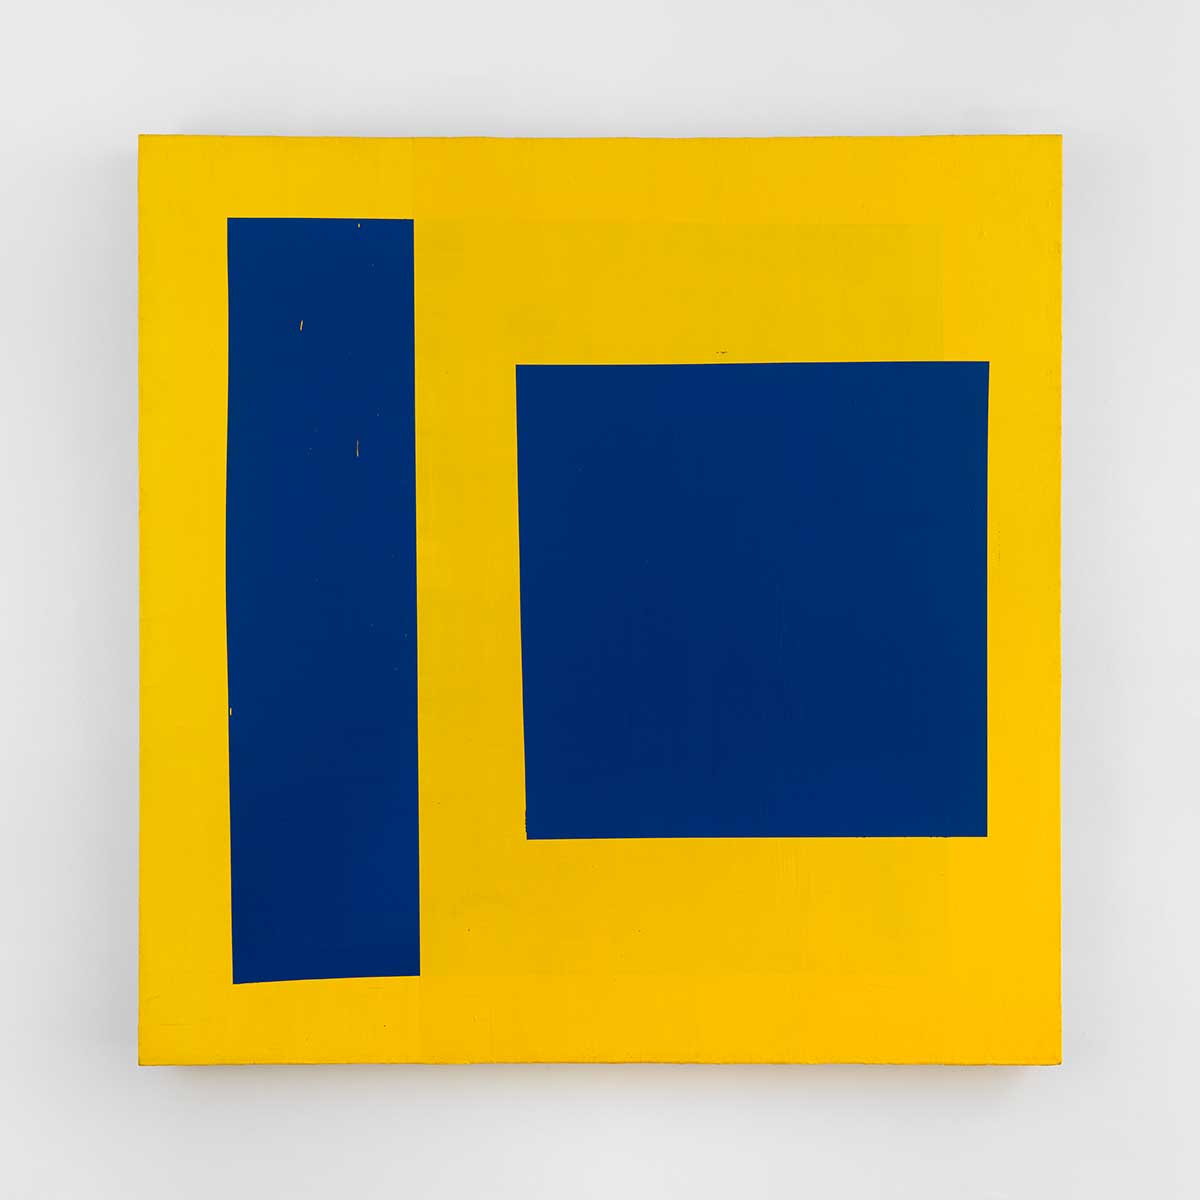 Blue rectangle and square on yellow background